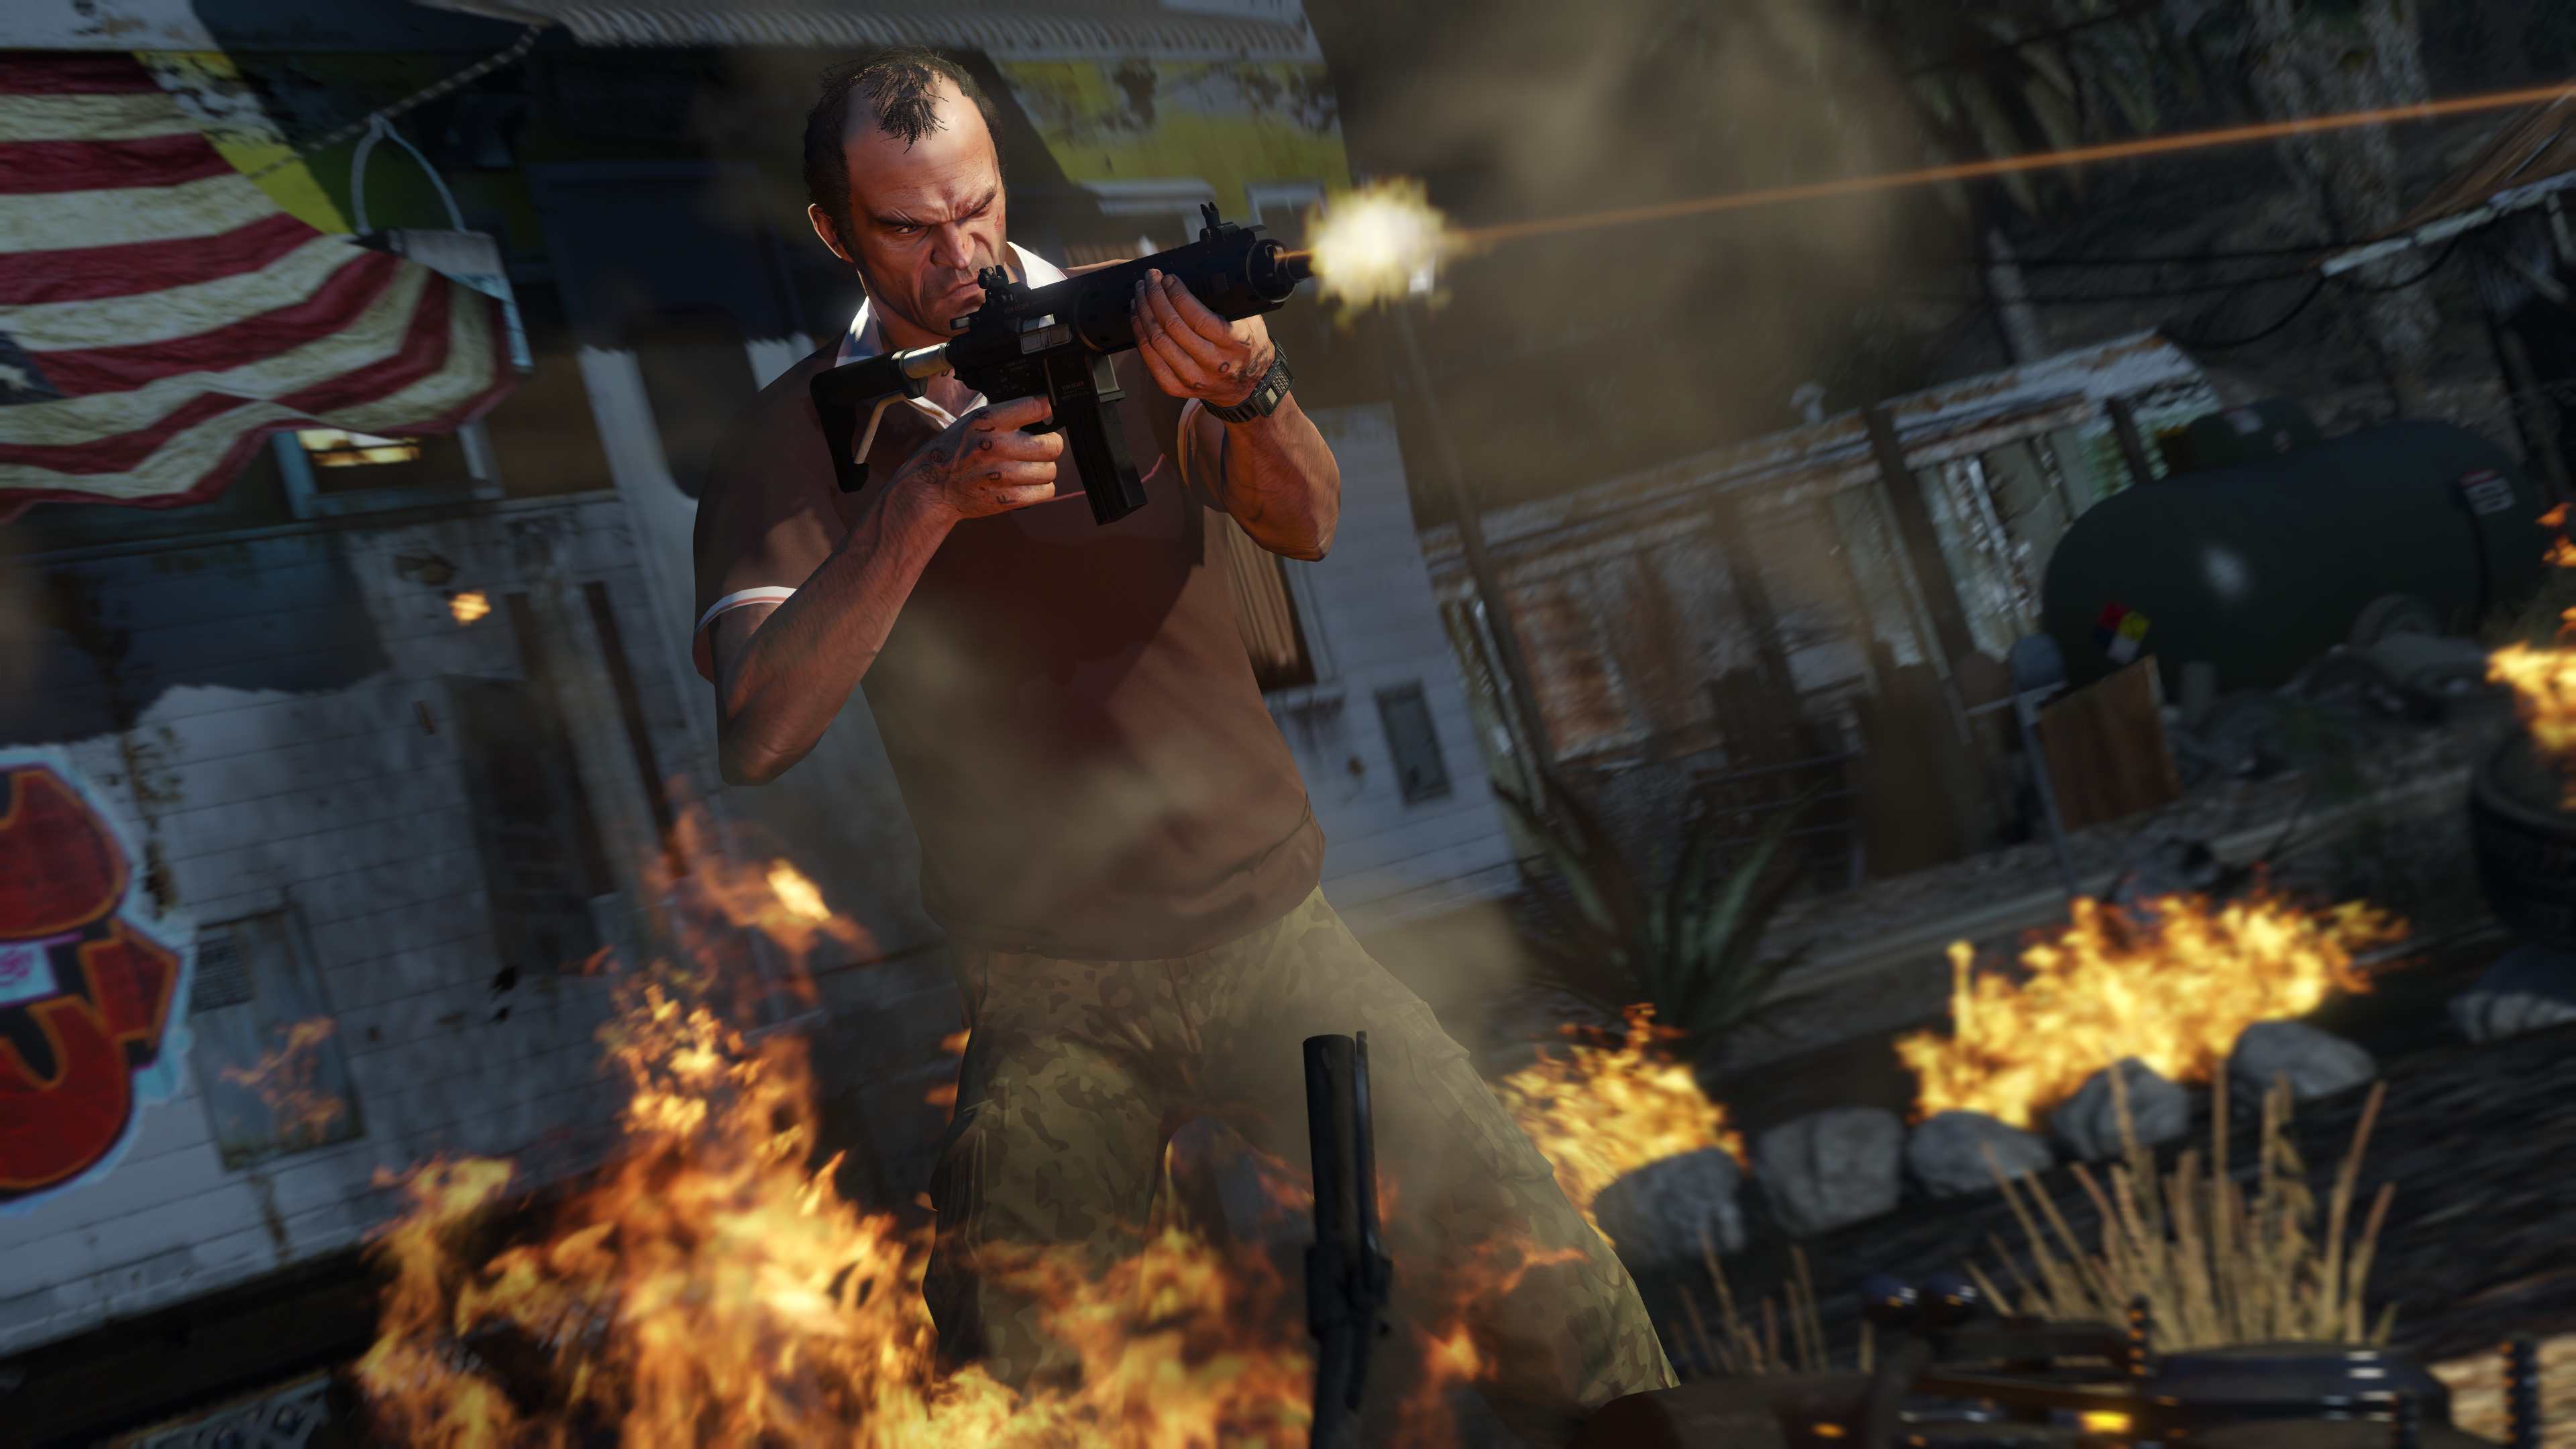  Grand Theft Auto V HQ Background Wallpapers